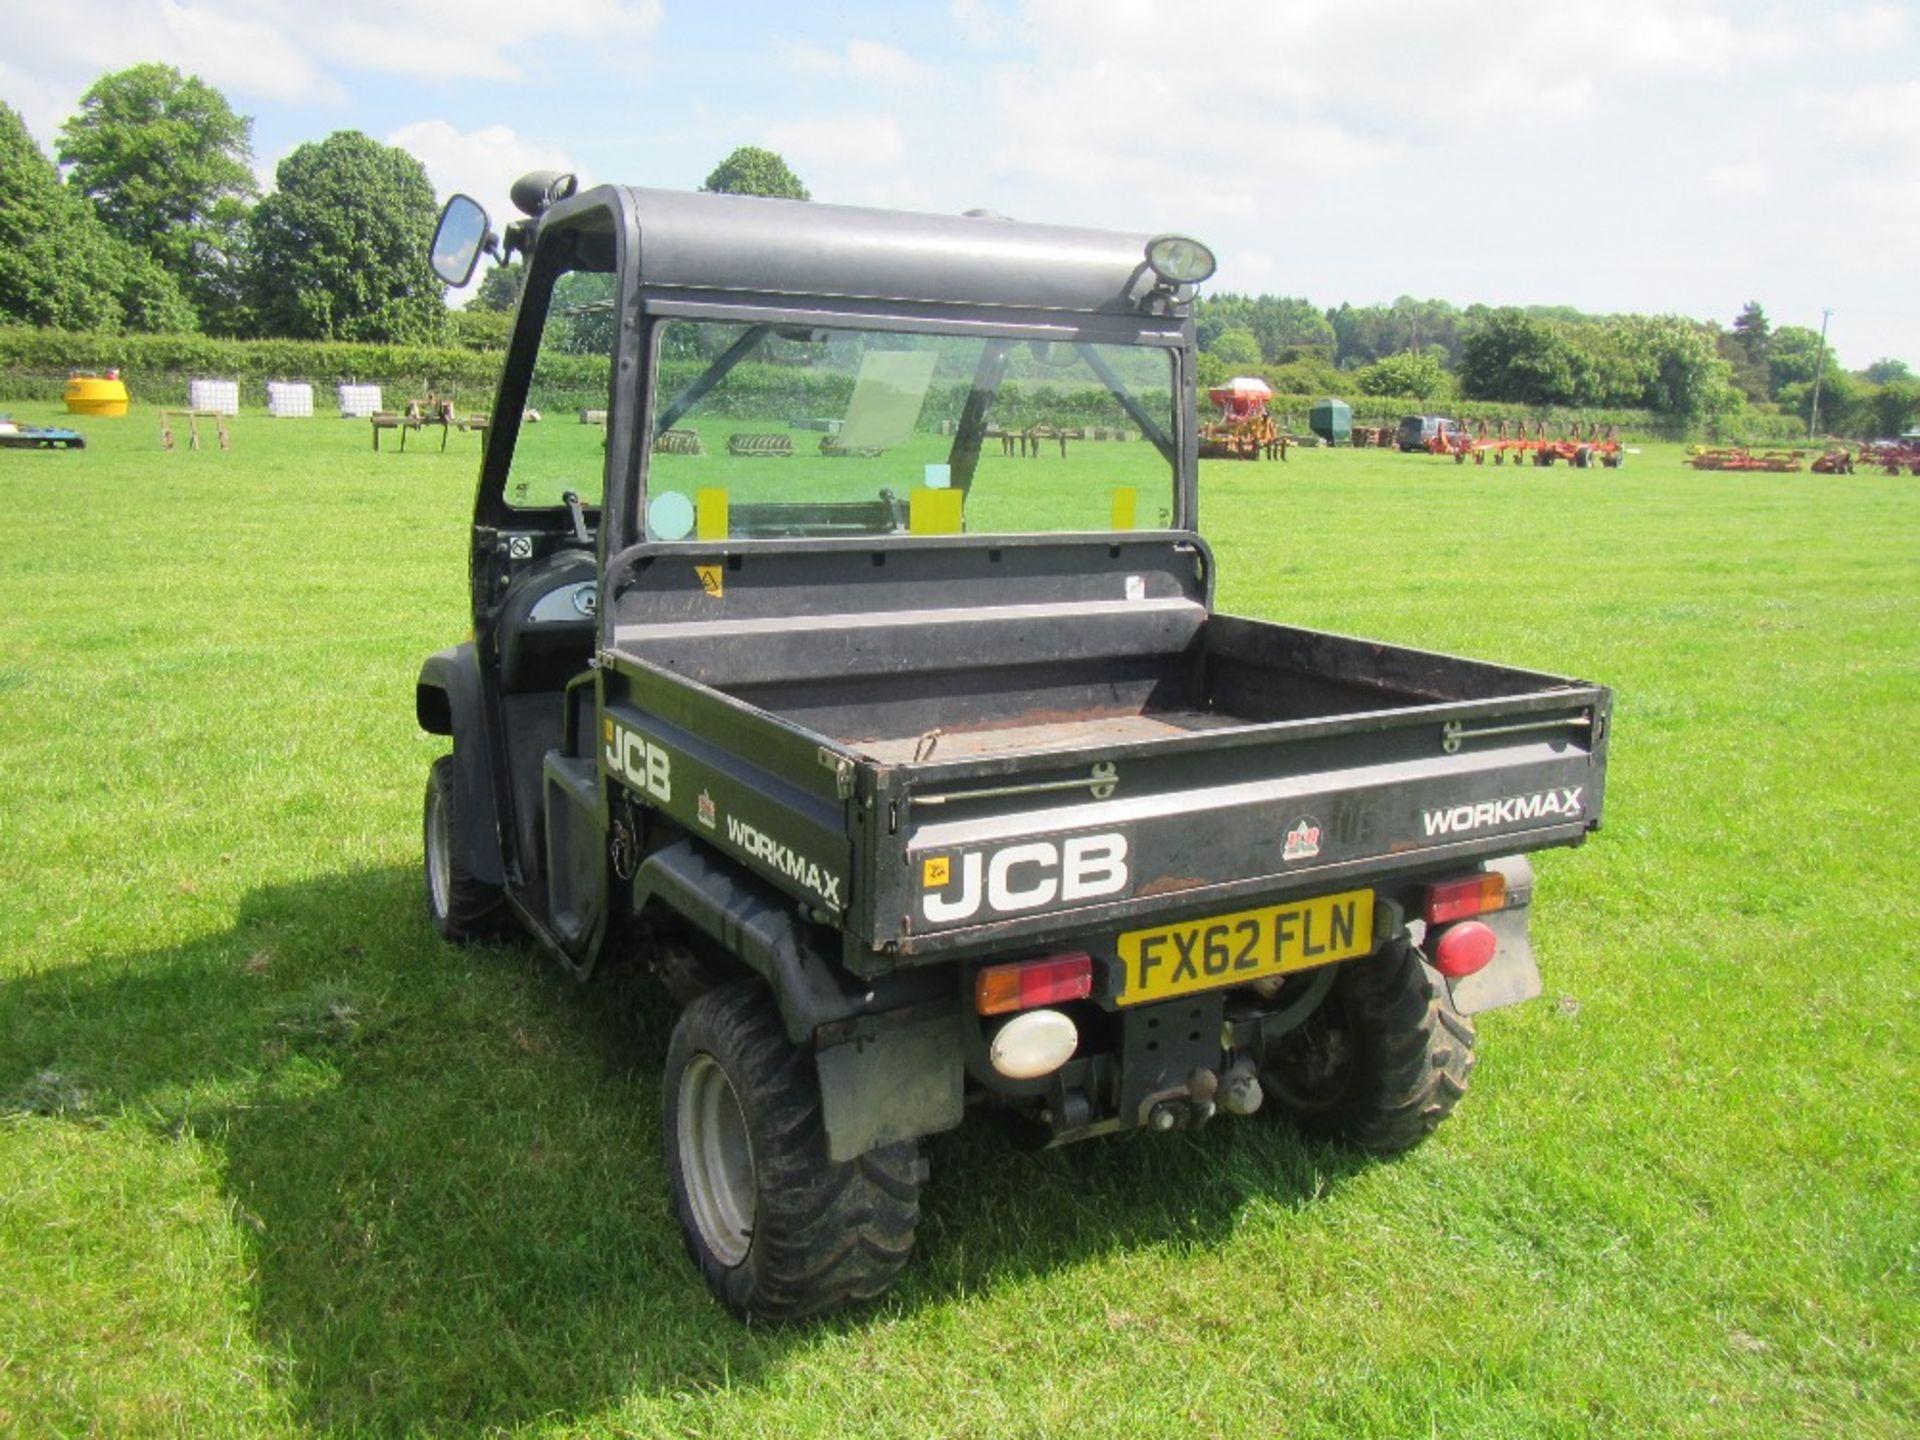 2012 JCB Workmax 1000D diesel 4x4 UTV Fitted with half cab Reg. No: FX62 FLN Serial No. - Image 3 of 5